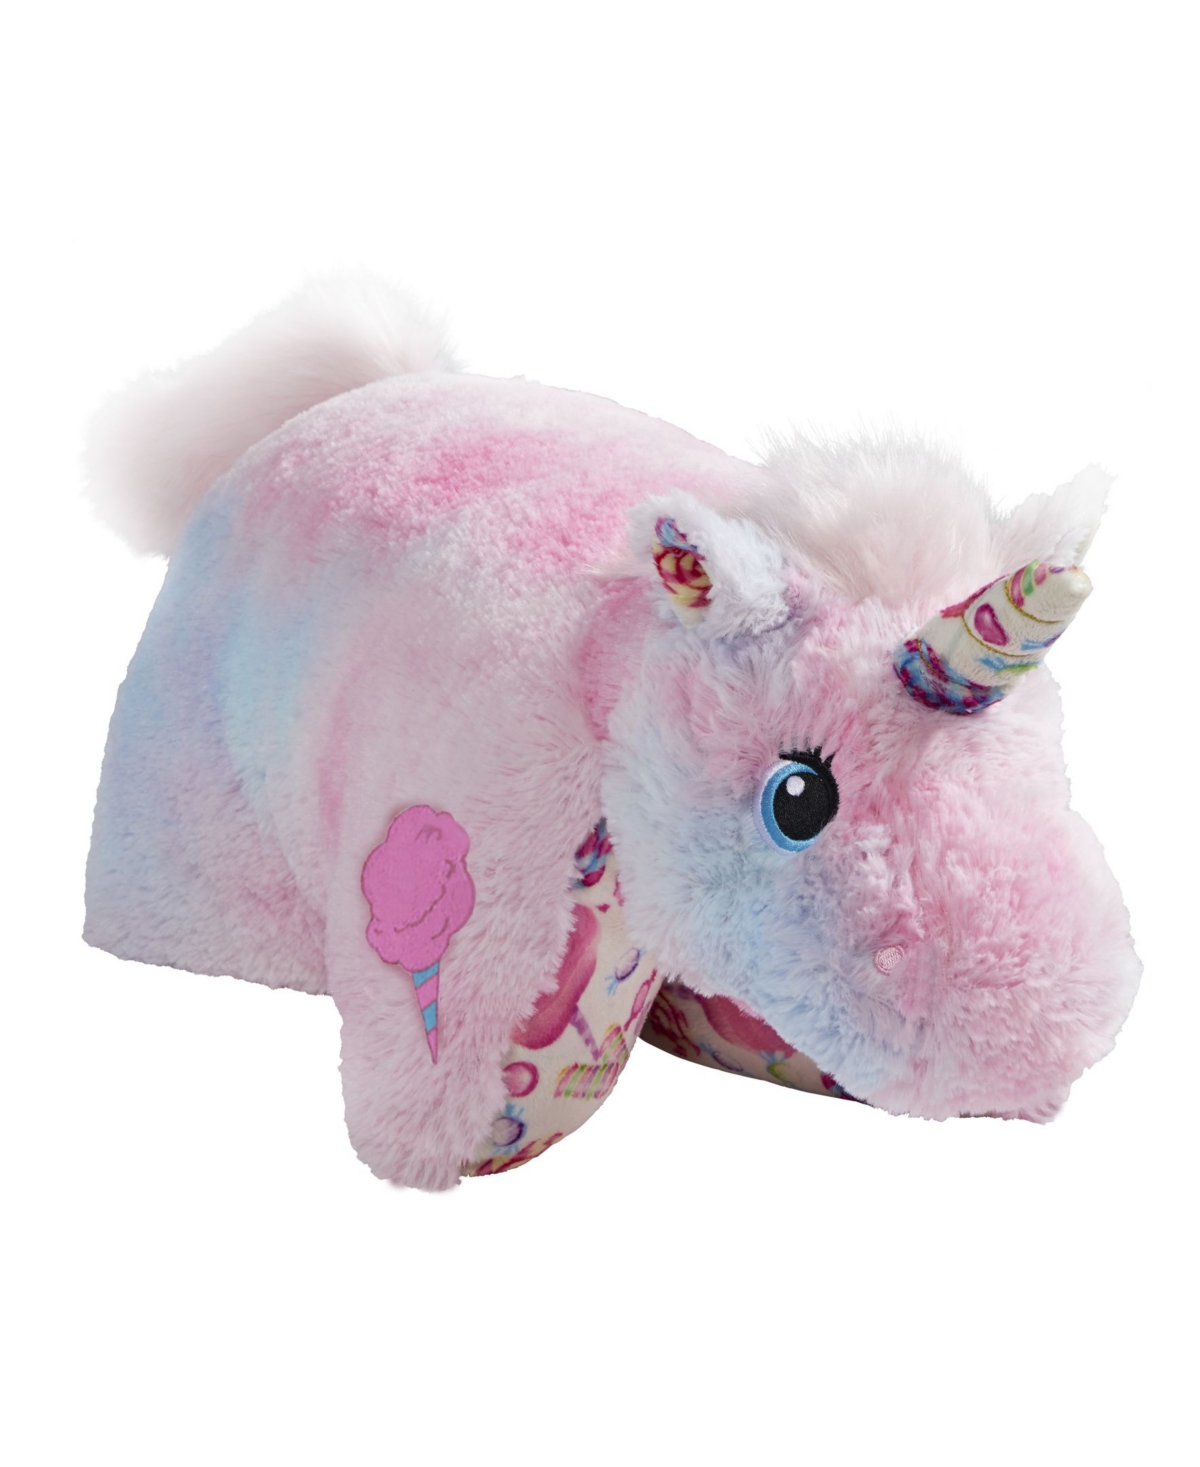 Pillow Pets Kids' Sweet Scented Cotton Candy Unicorn Stuffed Animal Plush Toy In White,pink